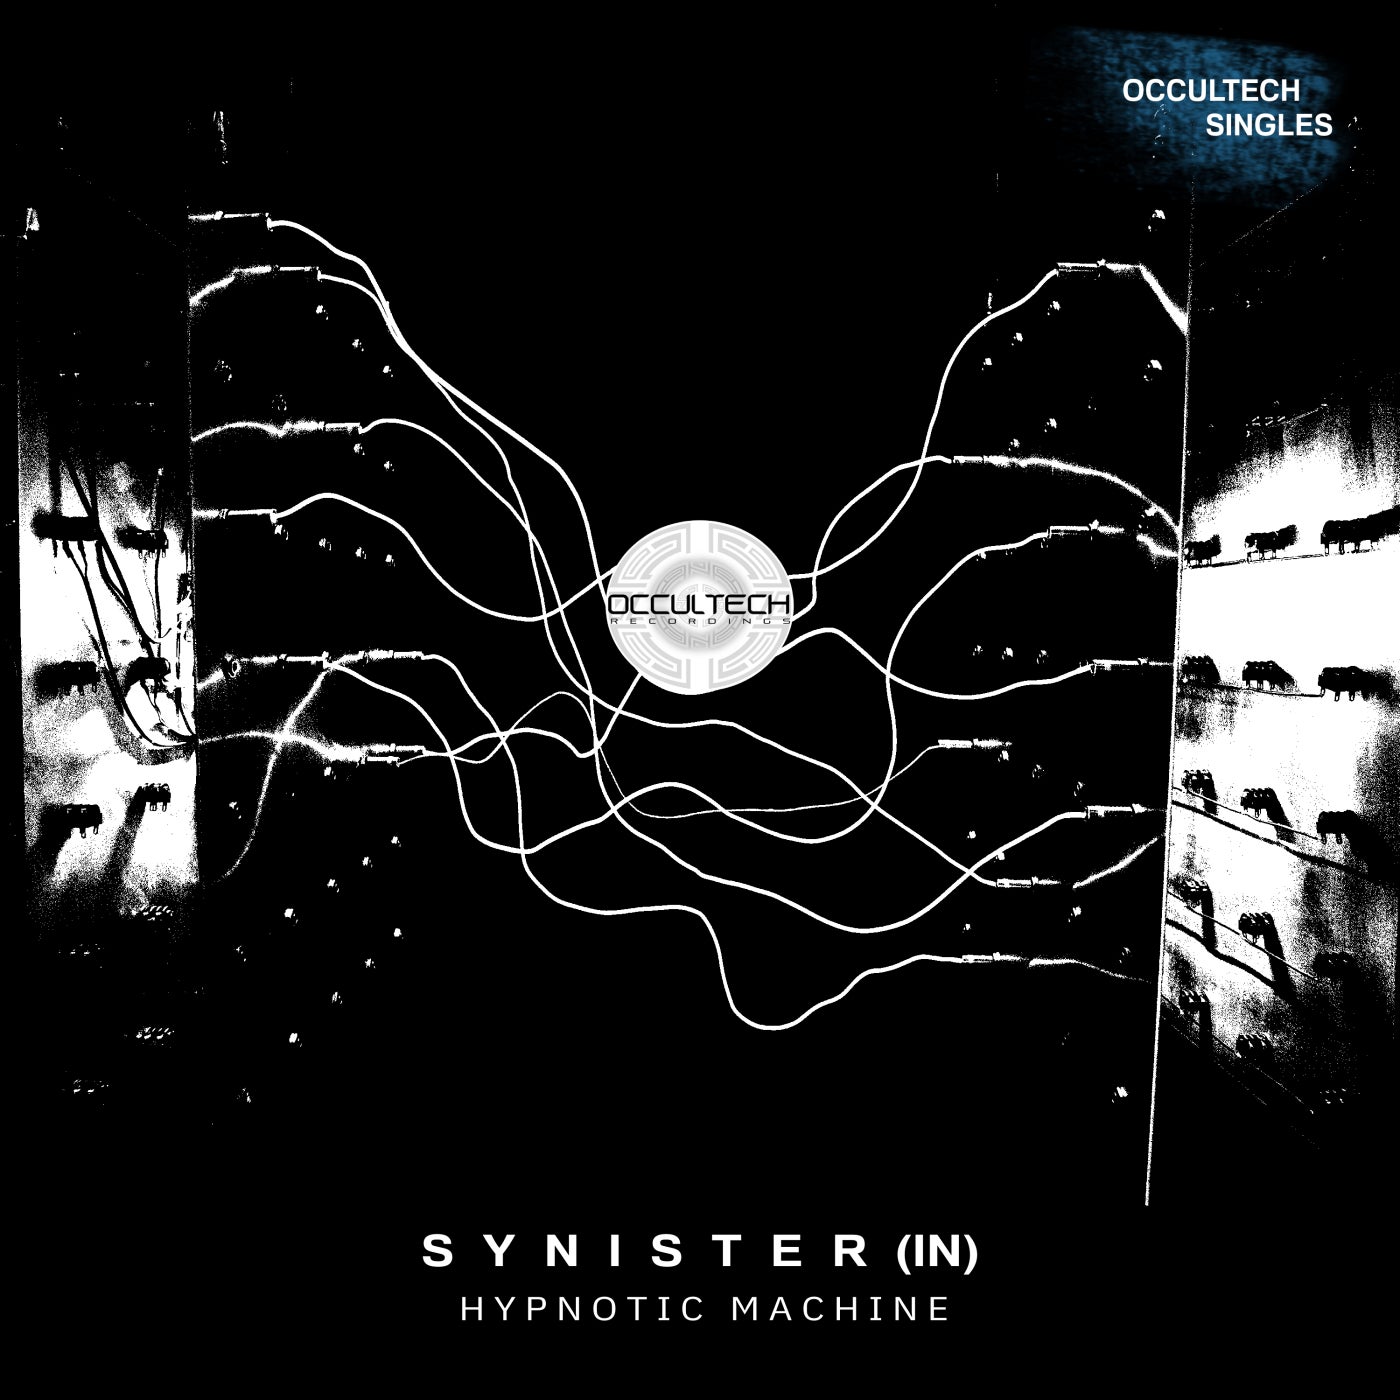 Occultech Singles 05 - Synister (IN) : Hypnotic Machine